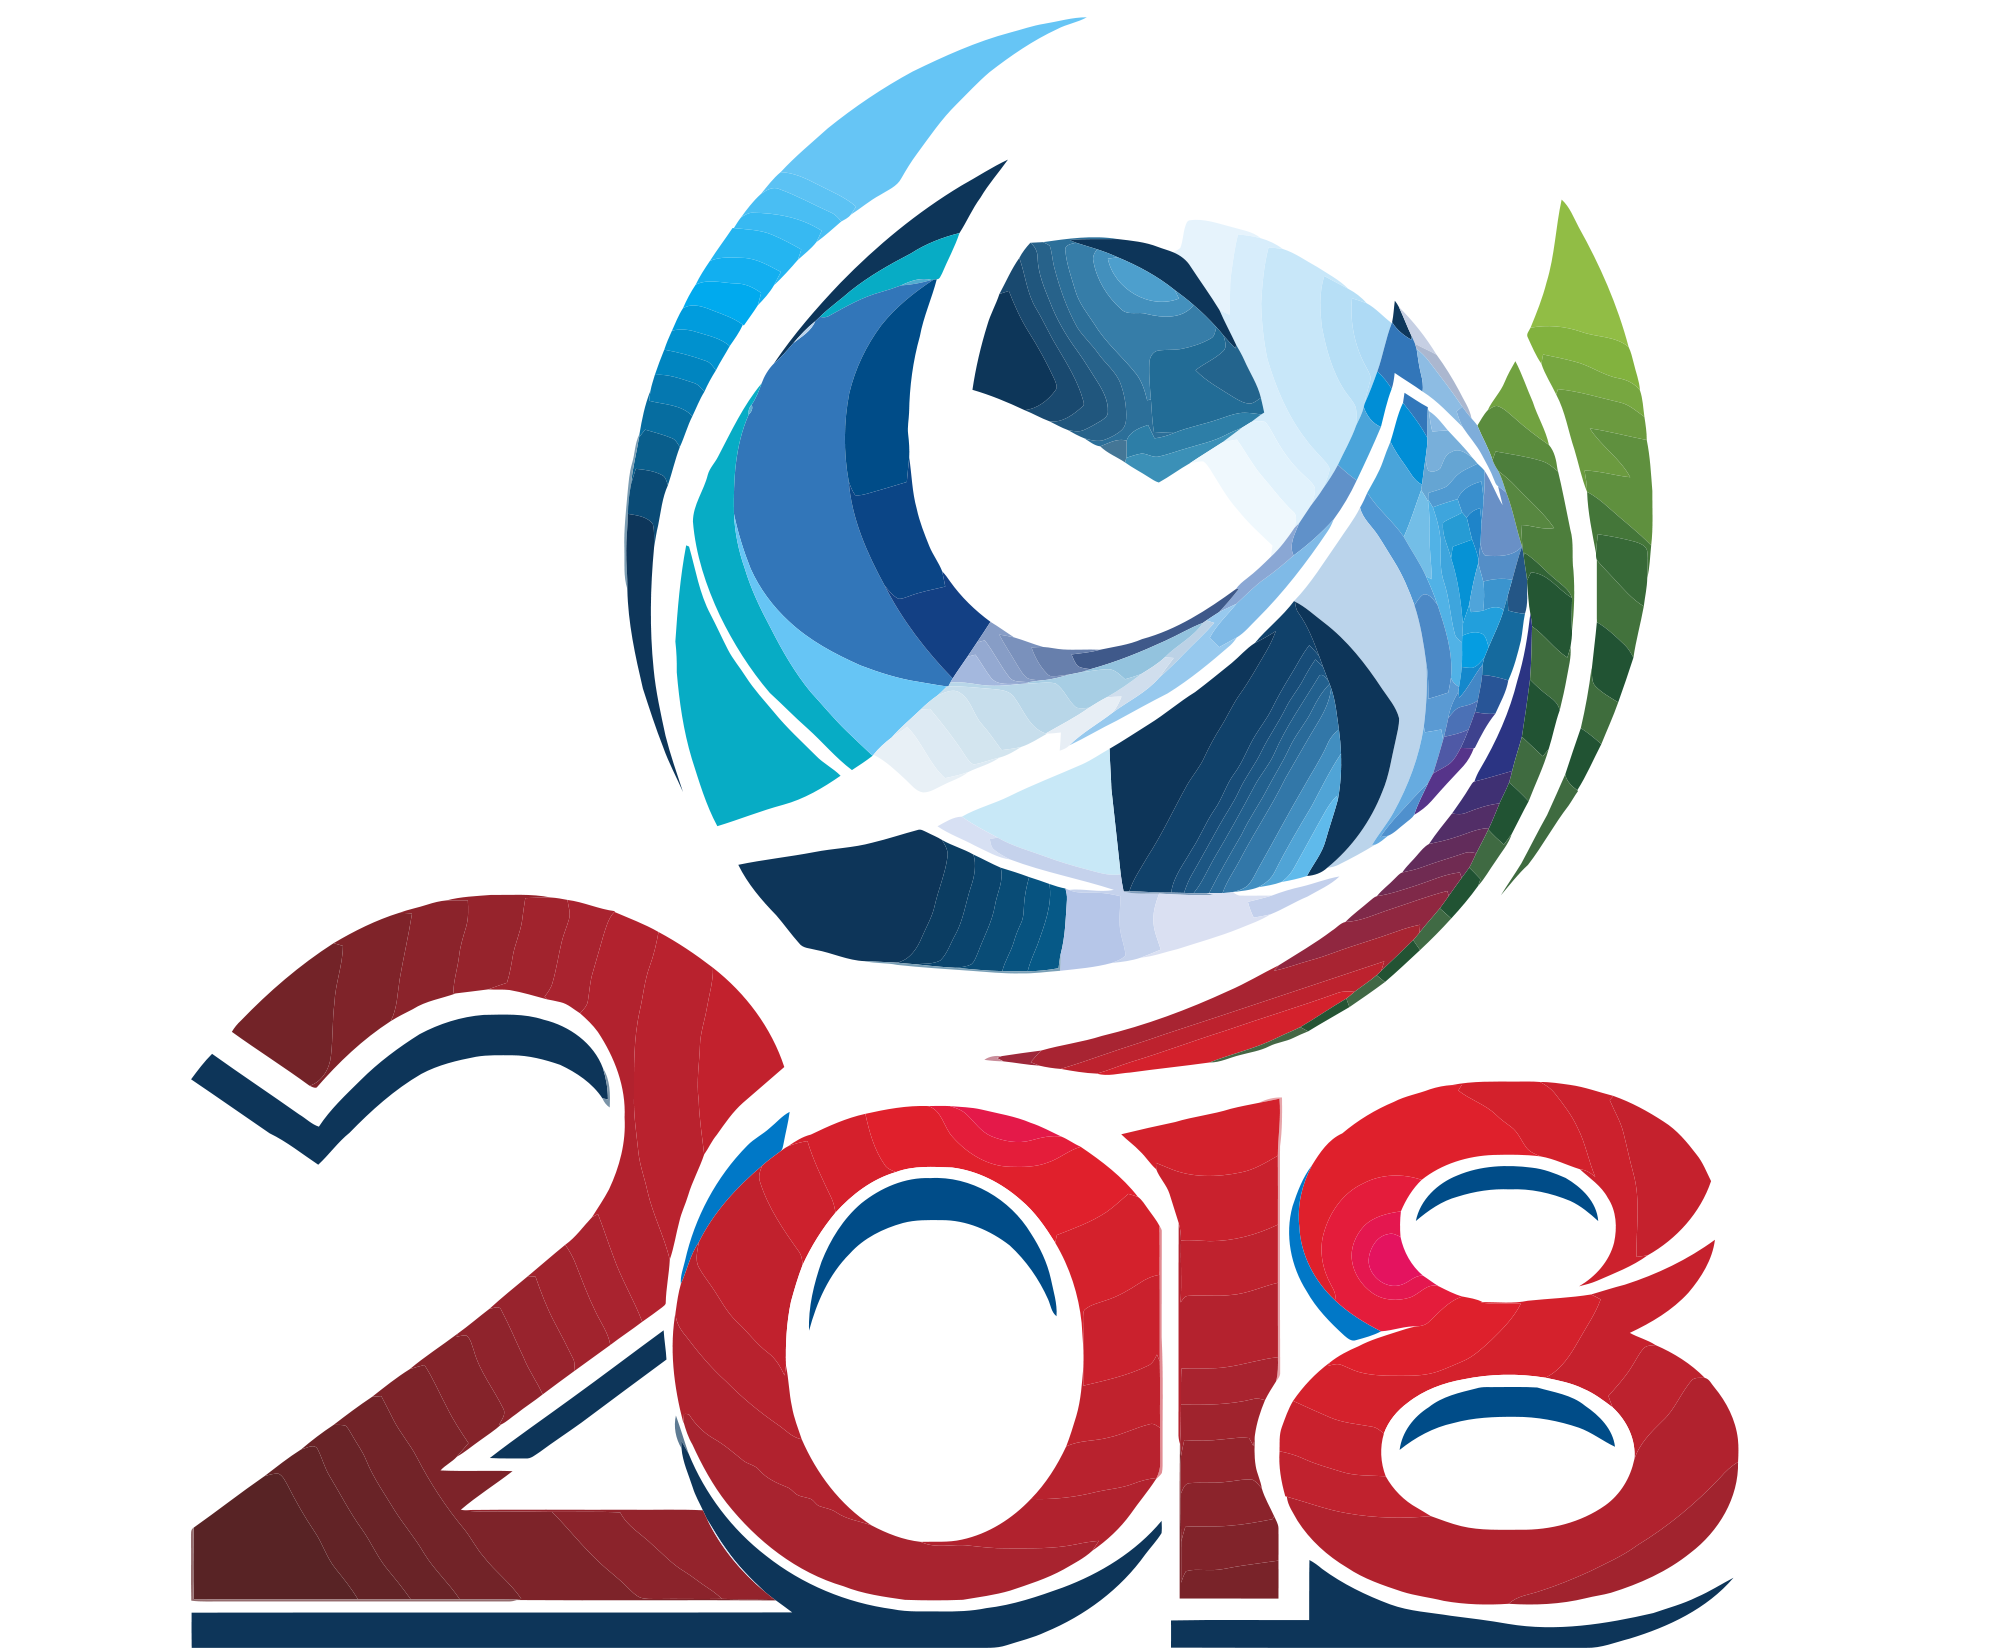 FIFA_World_Cup_Russia_2018_bidding_logo.svg.png